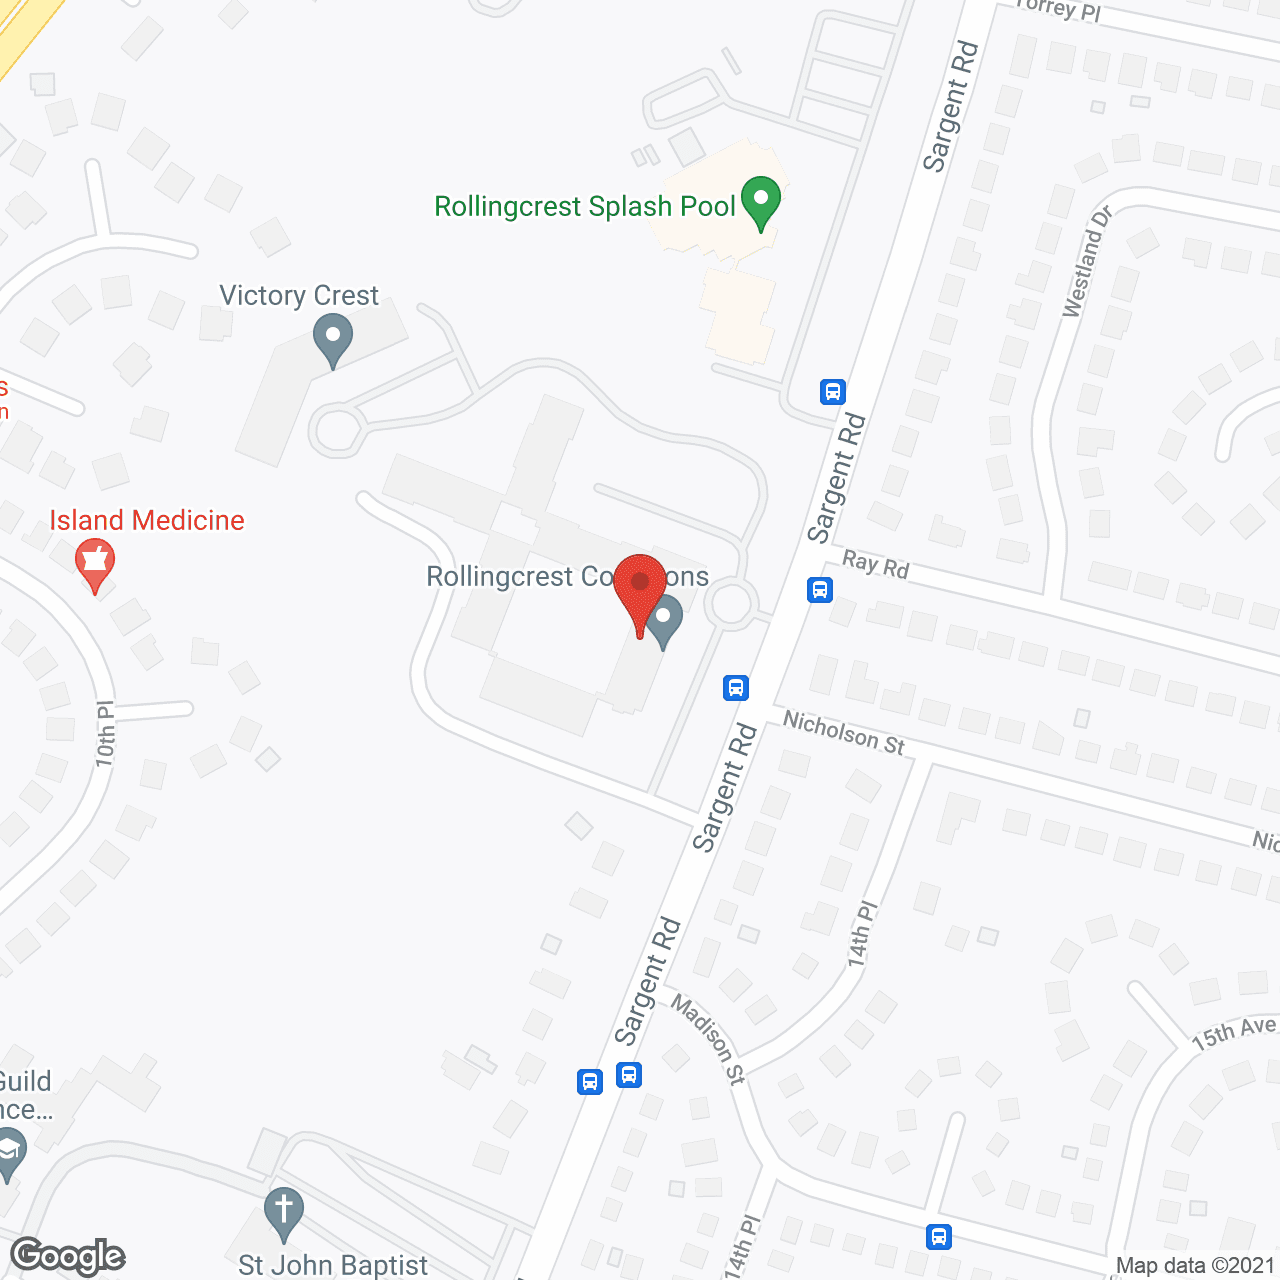 Rollingcrest Commons in google map